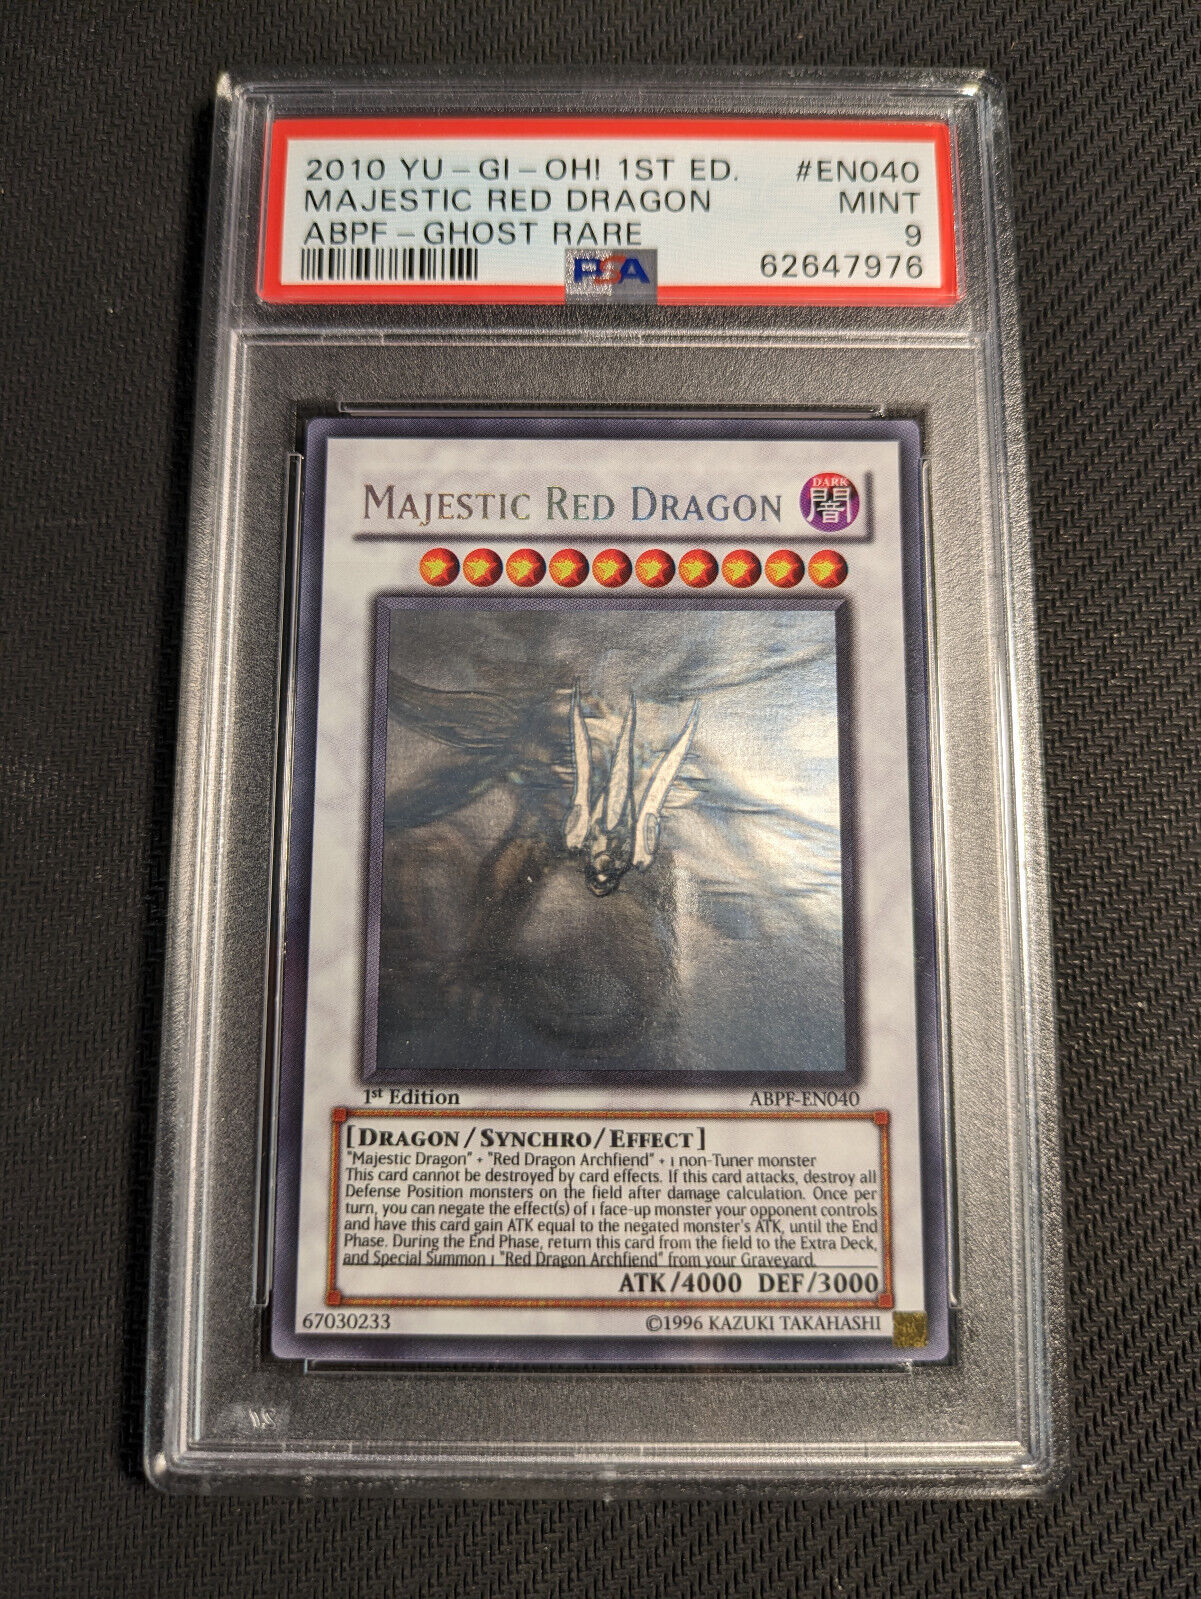 Yugioh Majestic Red Dragon ABPF-EN040 1st Edition Ghost Rare PSA 9 Mint